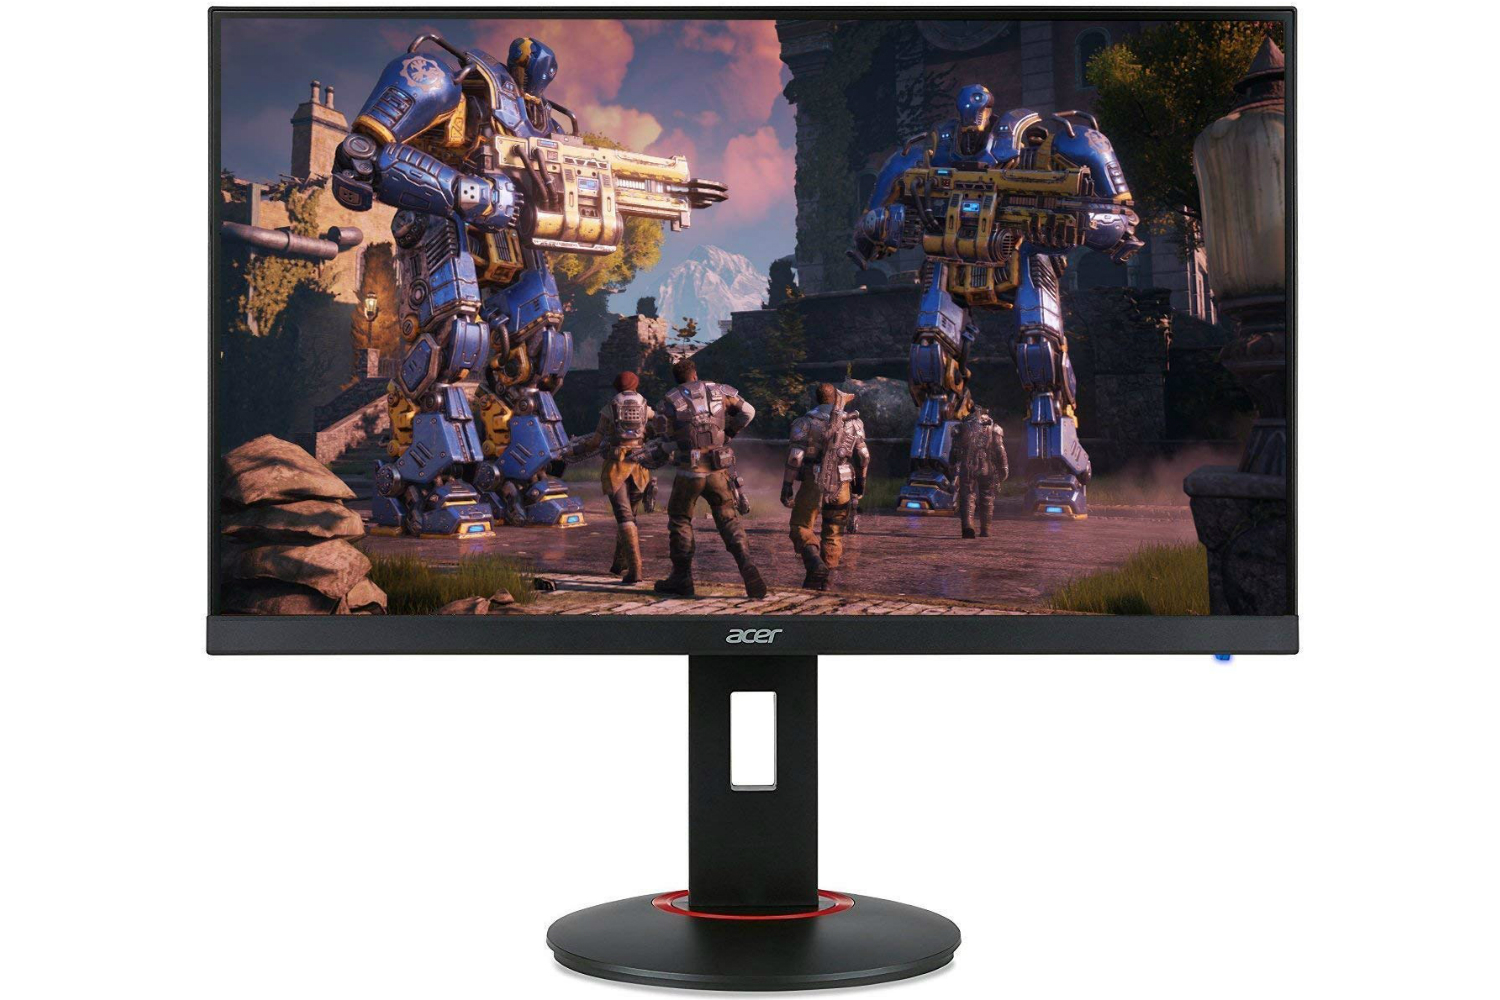 amazon slashes prices on acer laptops desktops monitors and gaming gear xf270h bbmiiprx 27 inch full hd 1920 x 1080 zero fram